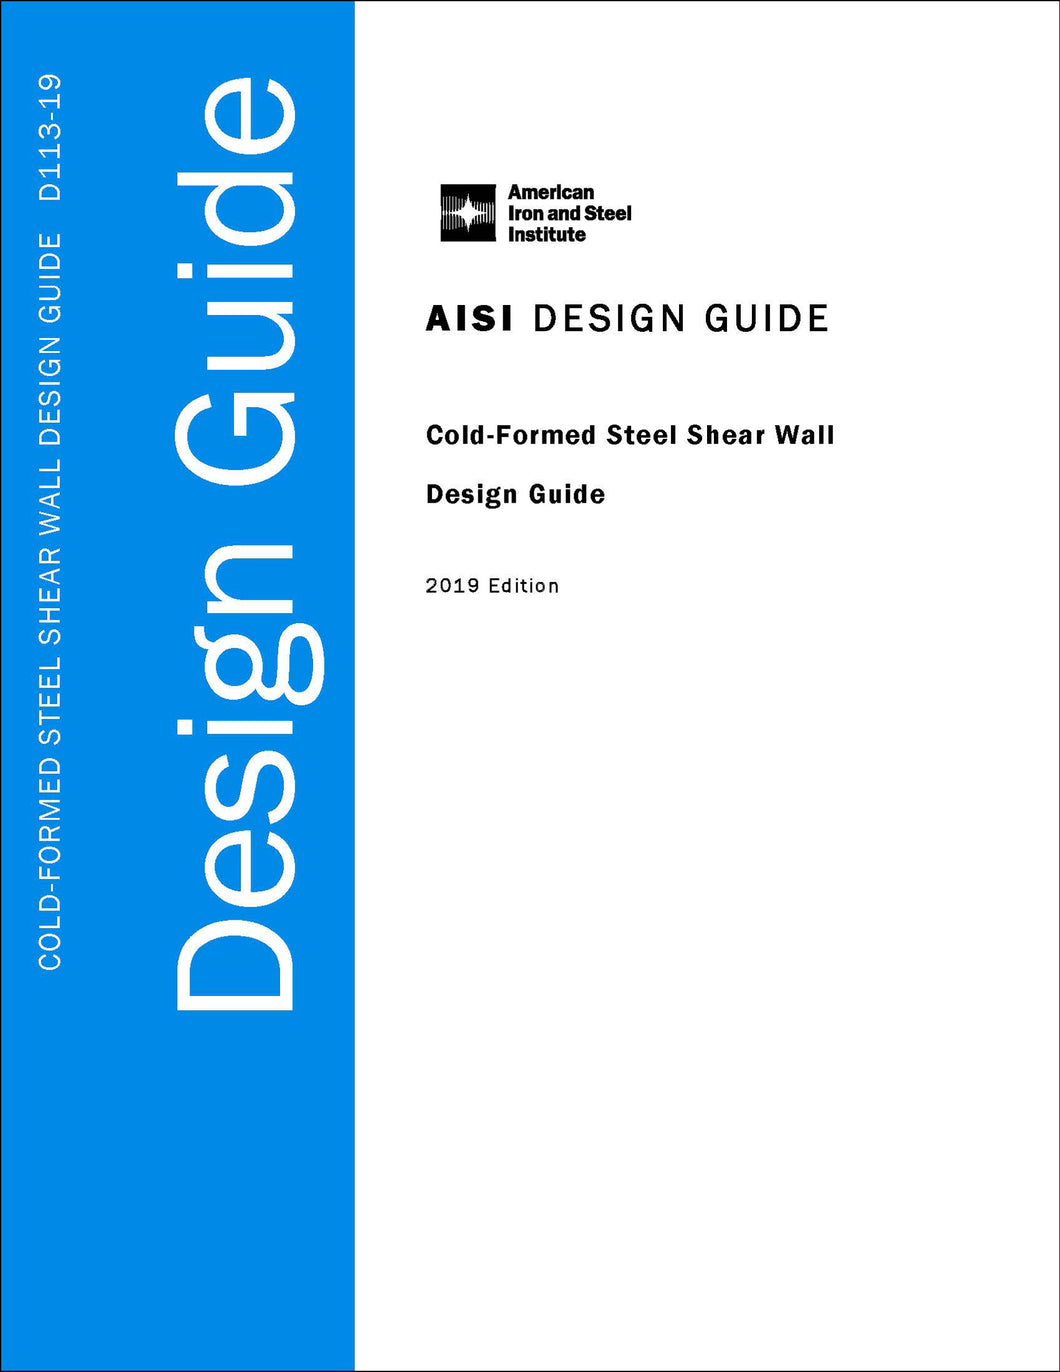 Cold-Formed Steel Shear Wall Design Guide - 2019 Edition - Electronic Version